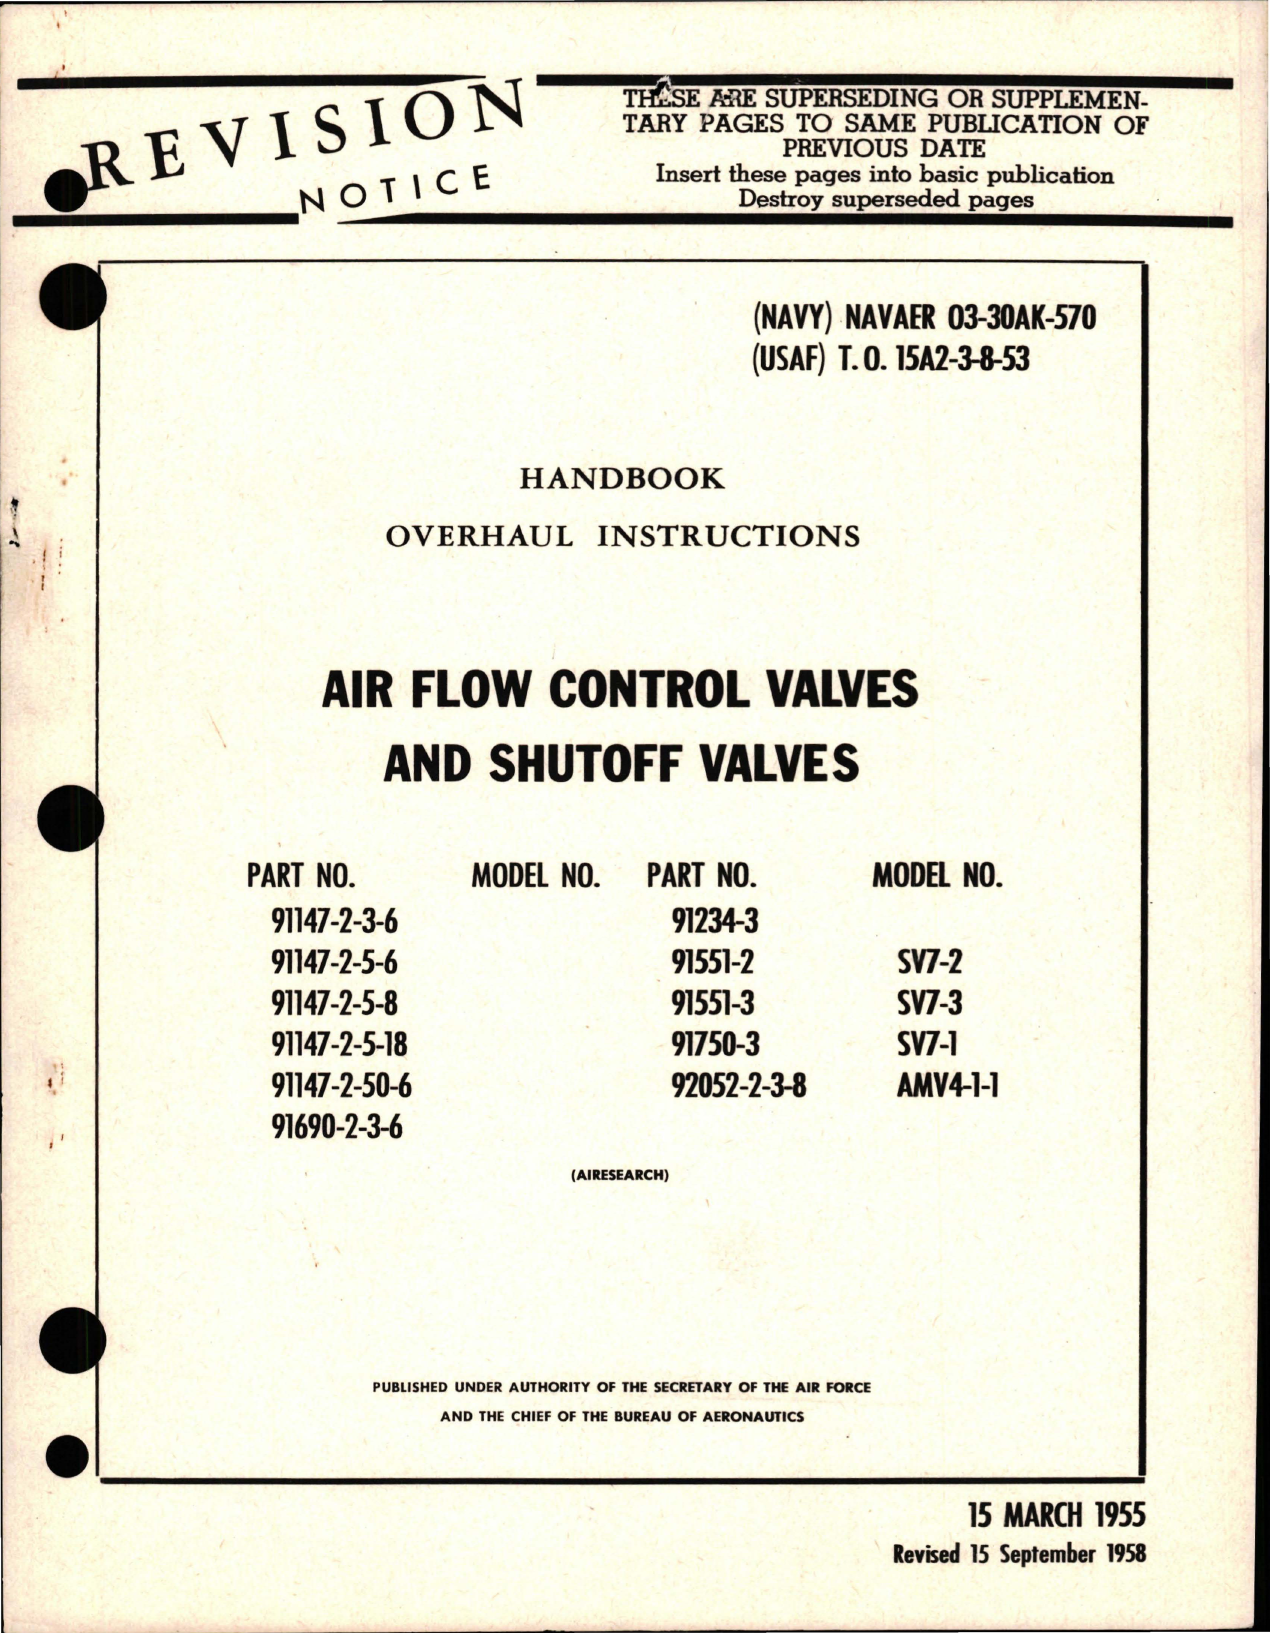 Sample page 1 from AirCorps Library document: Overhaul Instructions for Air Flow Control and Shutoff Valves - Models SV7-2, SV7-3, SV7-1, and AMV4-1-1